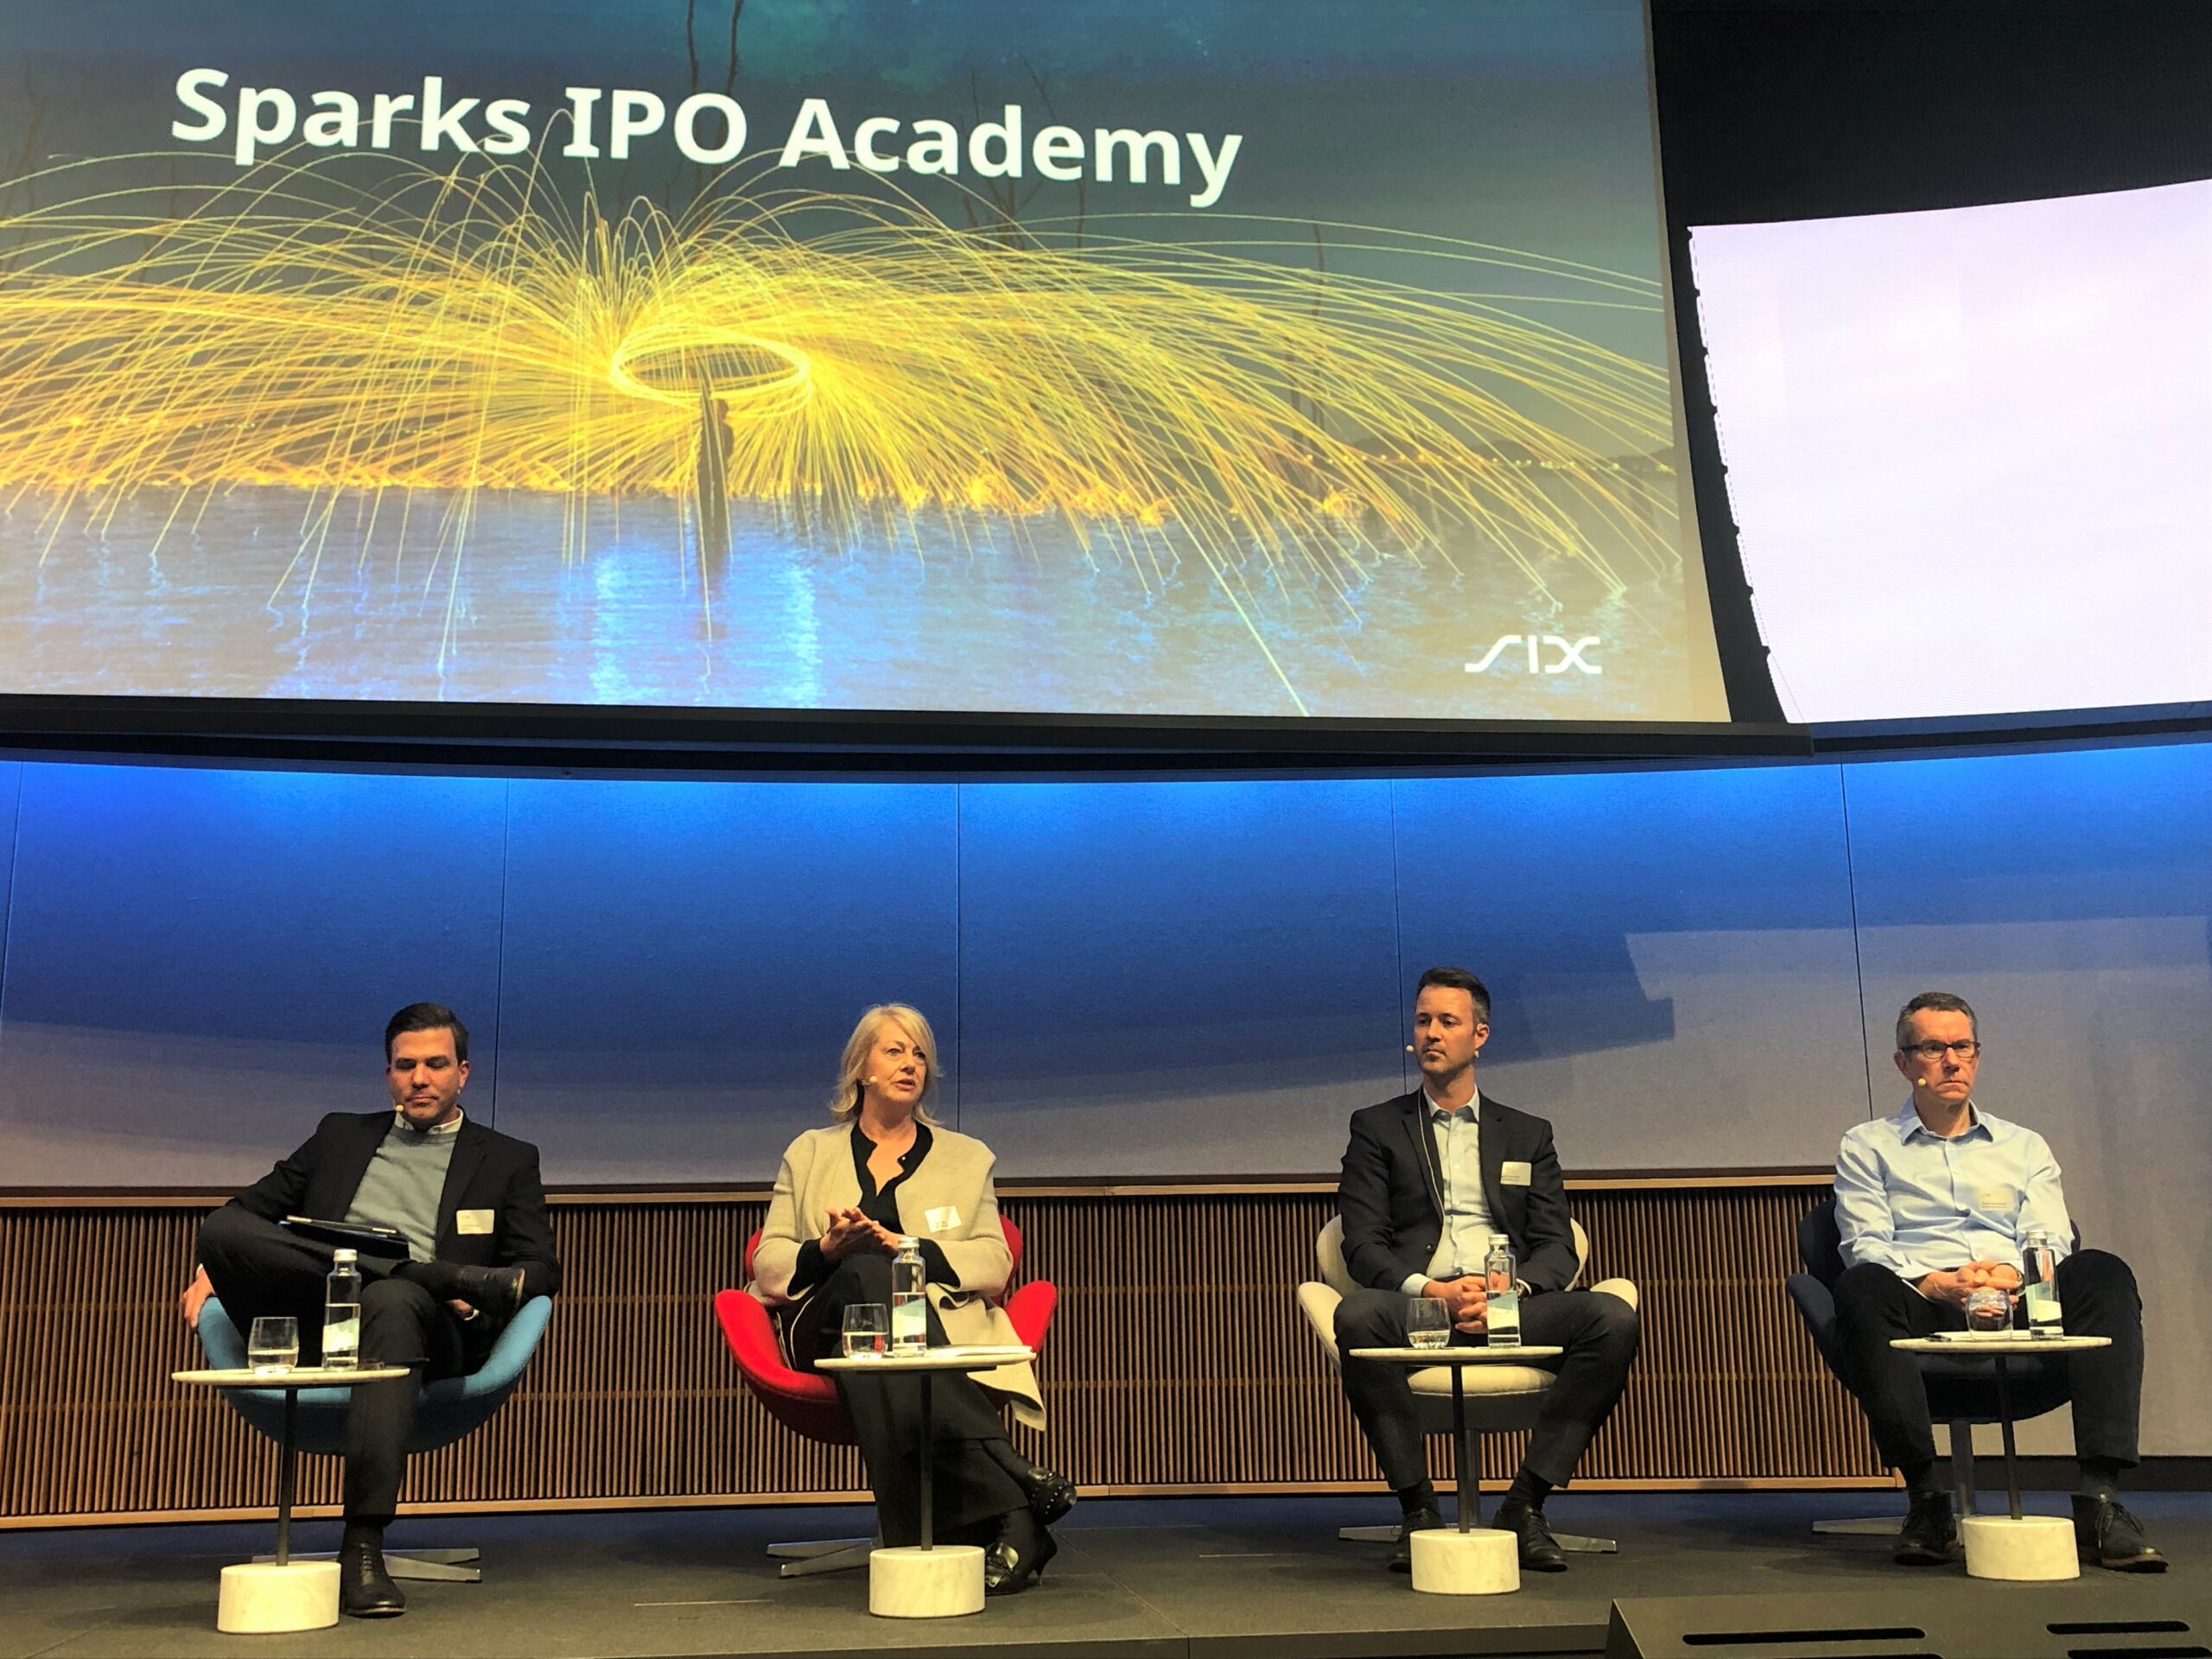 SIX Sparks IPO Academy